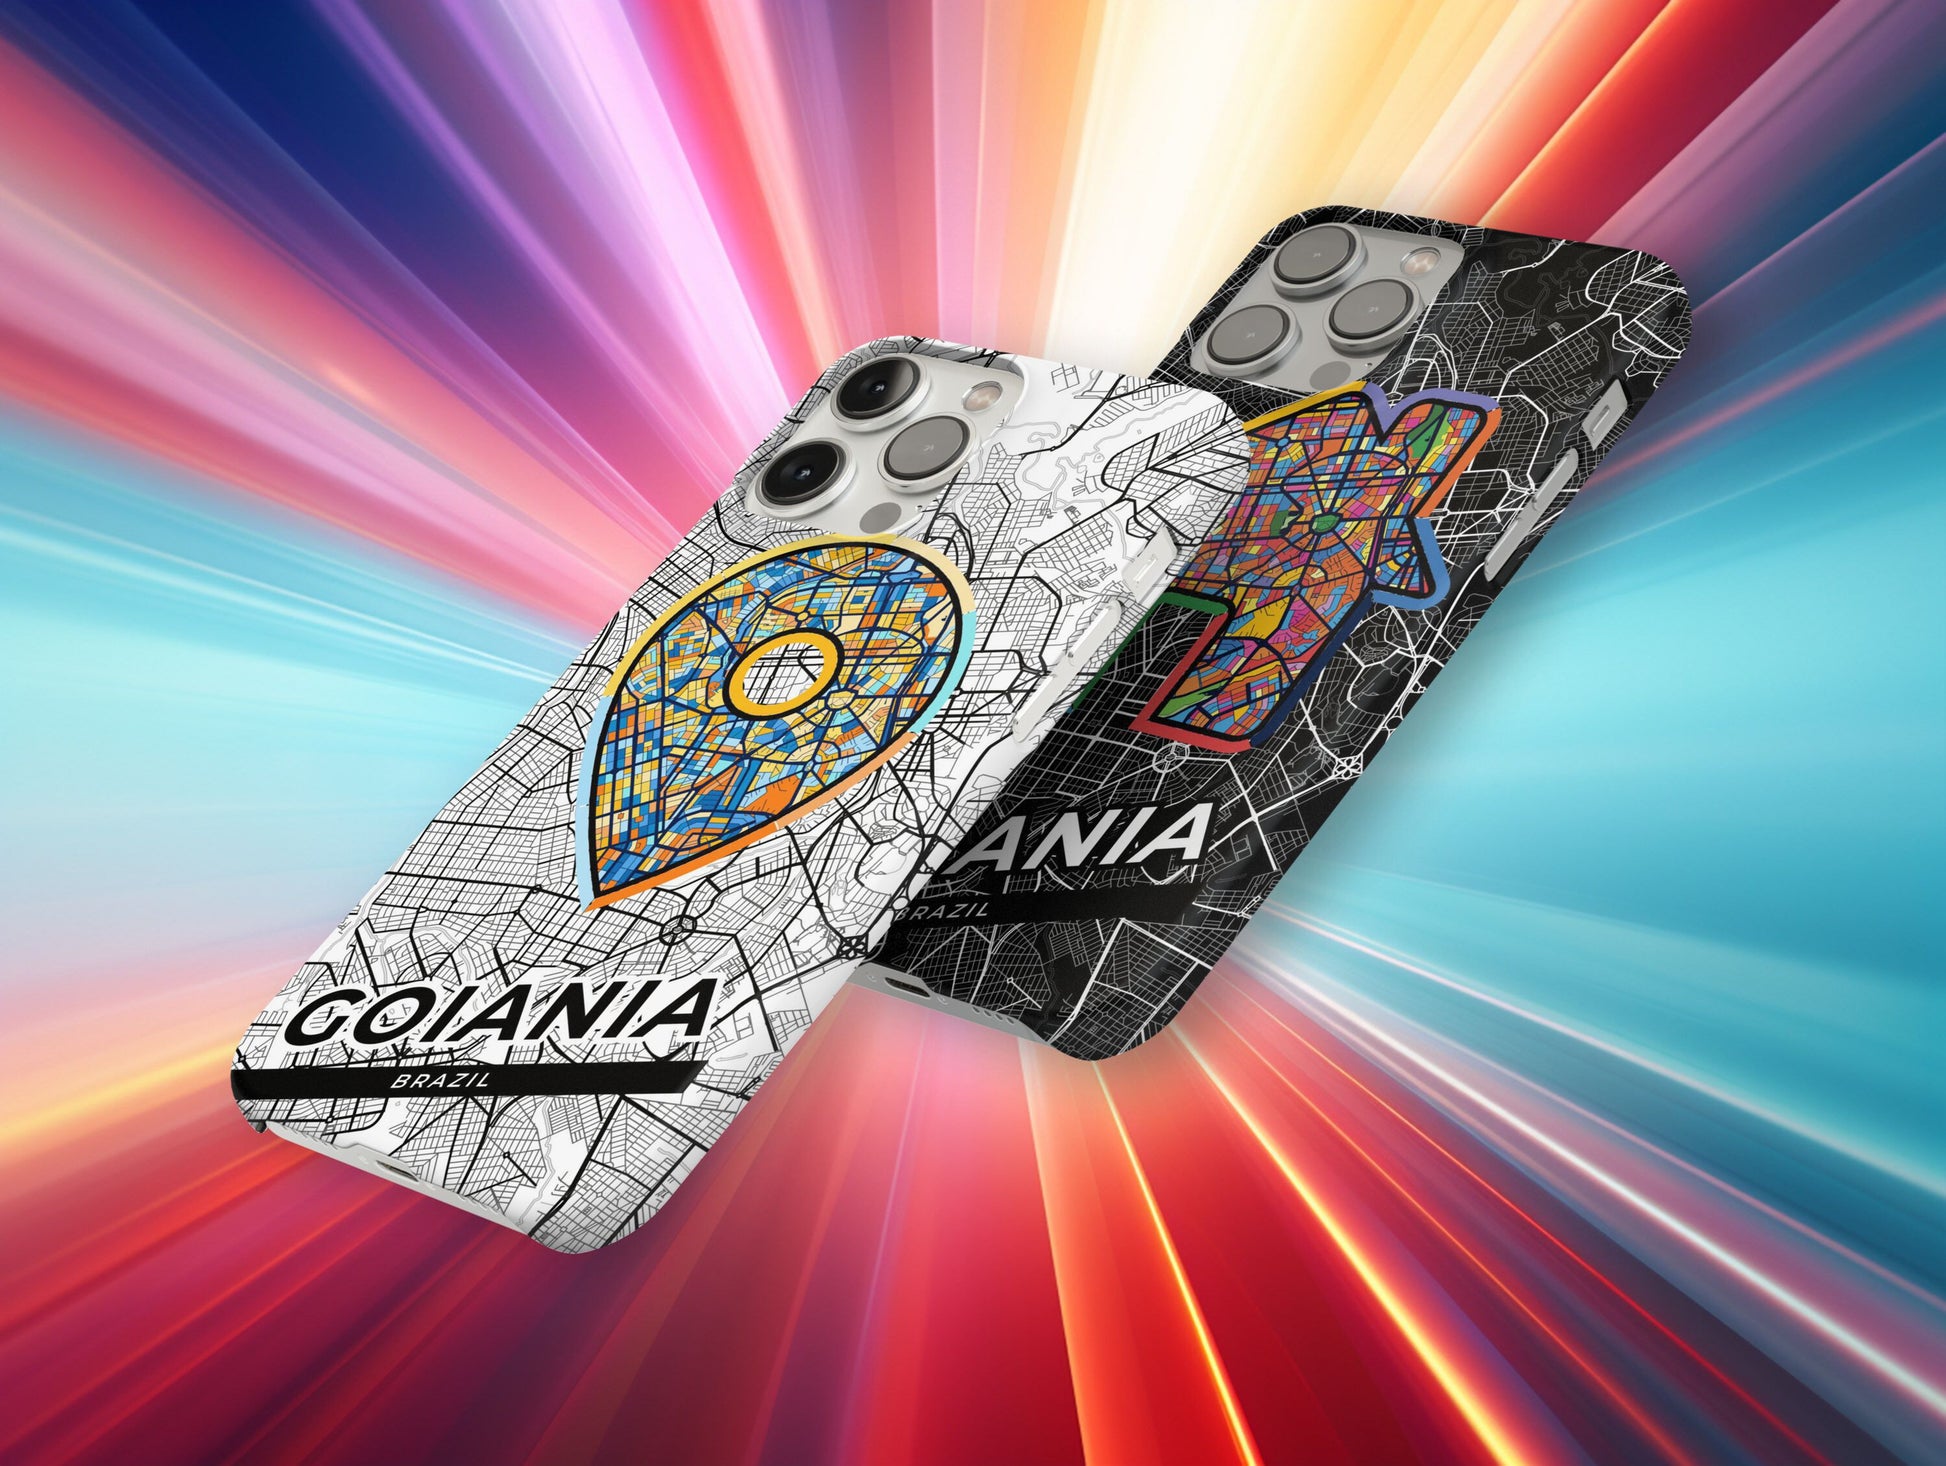 Goiania Brazil slim phone case with colorful icon. Birthday, wedding or housewarming gift. Couple match cases.